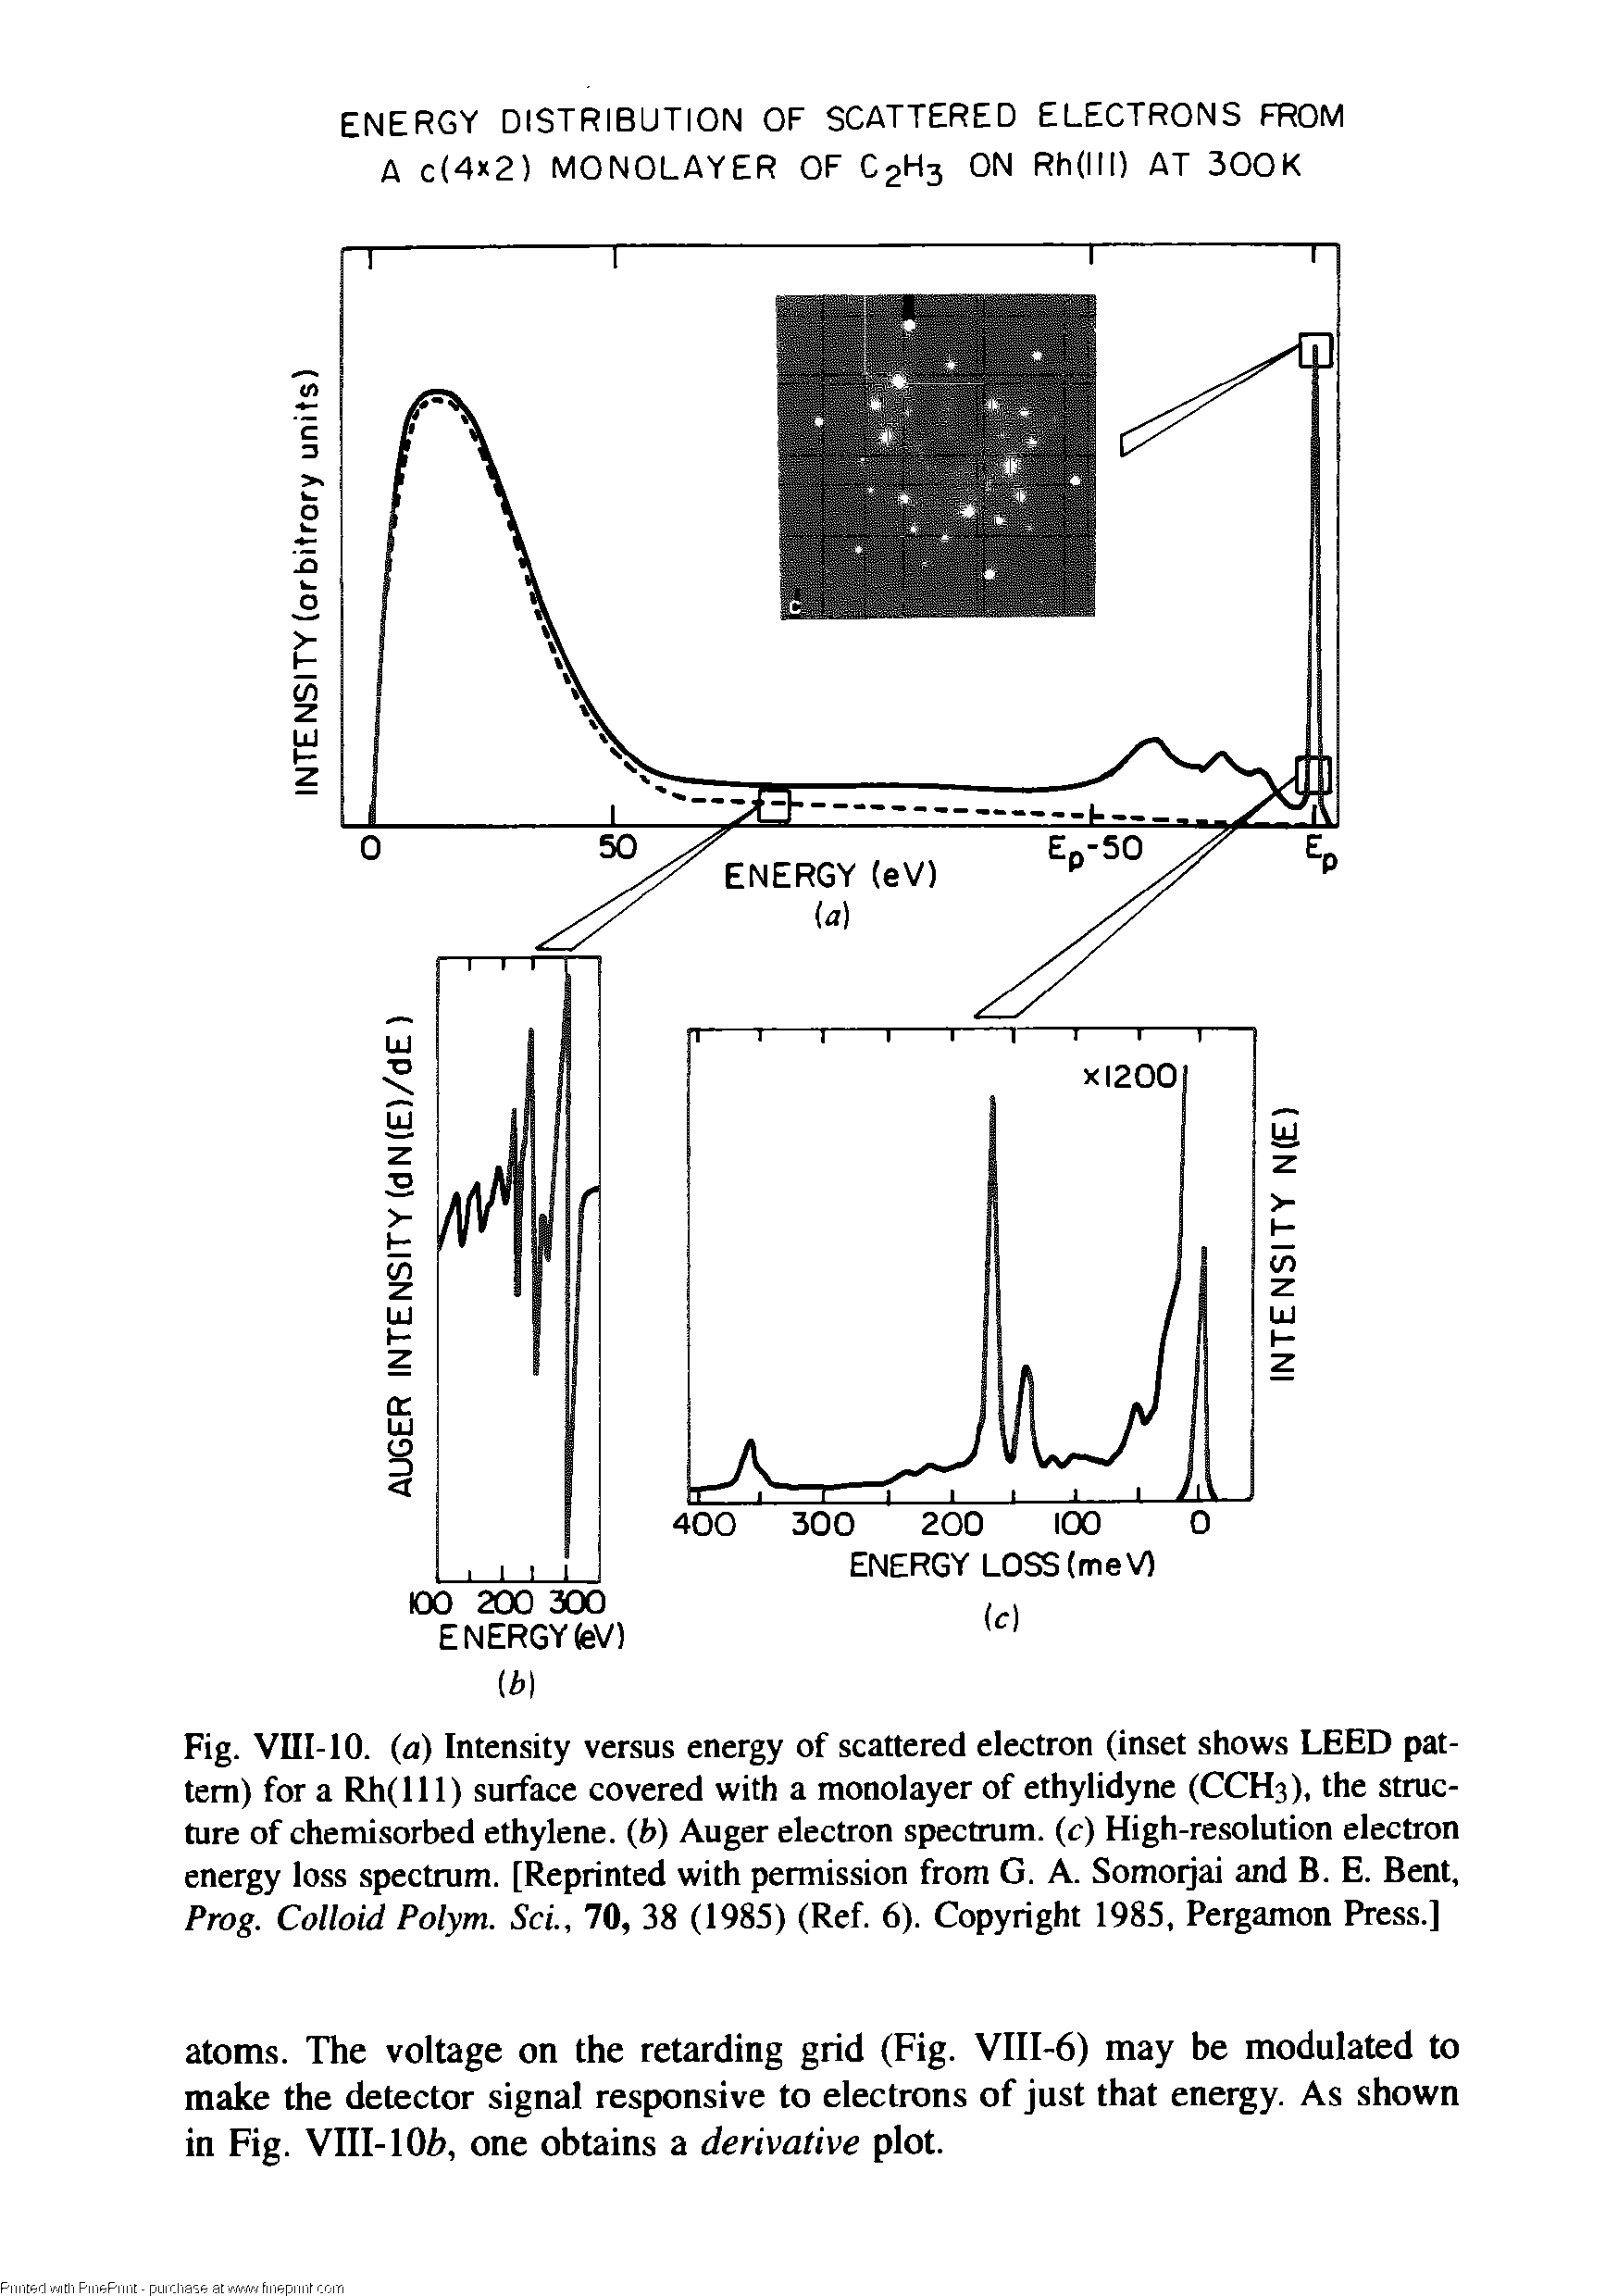 Fig. VIII-10. (a) Intensity versus energy of scattered electron (inset shows LEED pattern) for a Rh(lll) surface covered with a monolayer of ethylidyne (CCH3), the structure of chemisorbed ethylene, (b) Auger electron spectrum, (c) High-resolution electron energy loss spectrum. [Reprinted with permission from G. A. Somoijai and B. E. Bent, Prog. Colloid Polym. ScL, 70, 38 (1985) (Ref. 6). Copyright 1985, Pergamon Press.]...